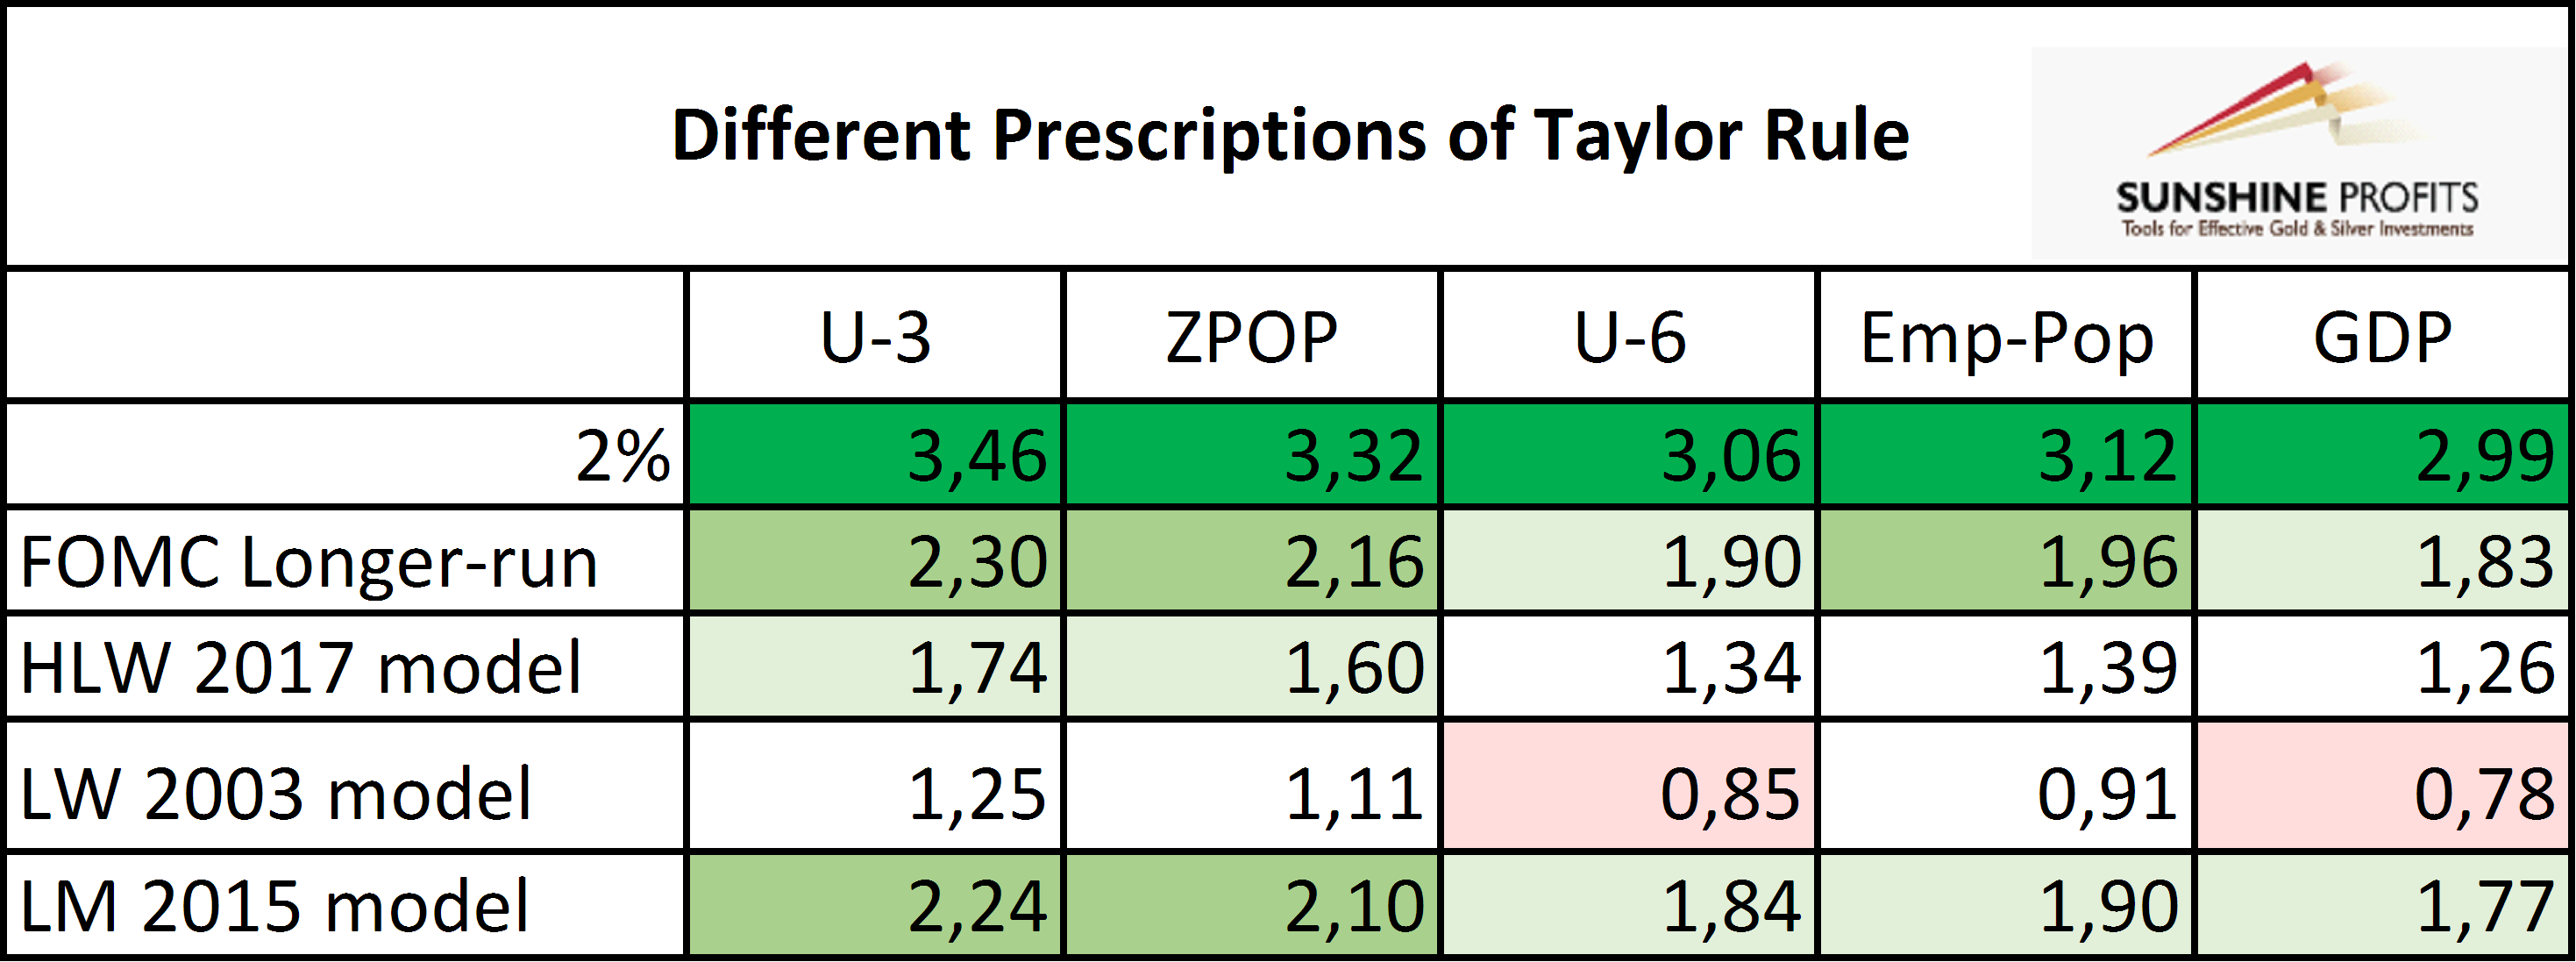 Different prescriptions of Taylor Rule